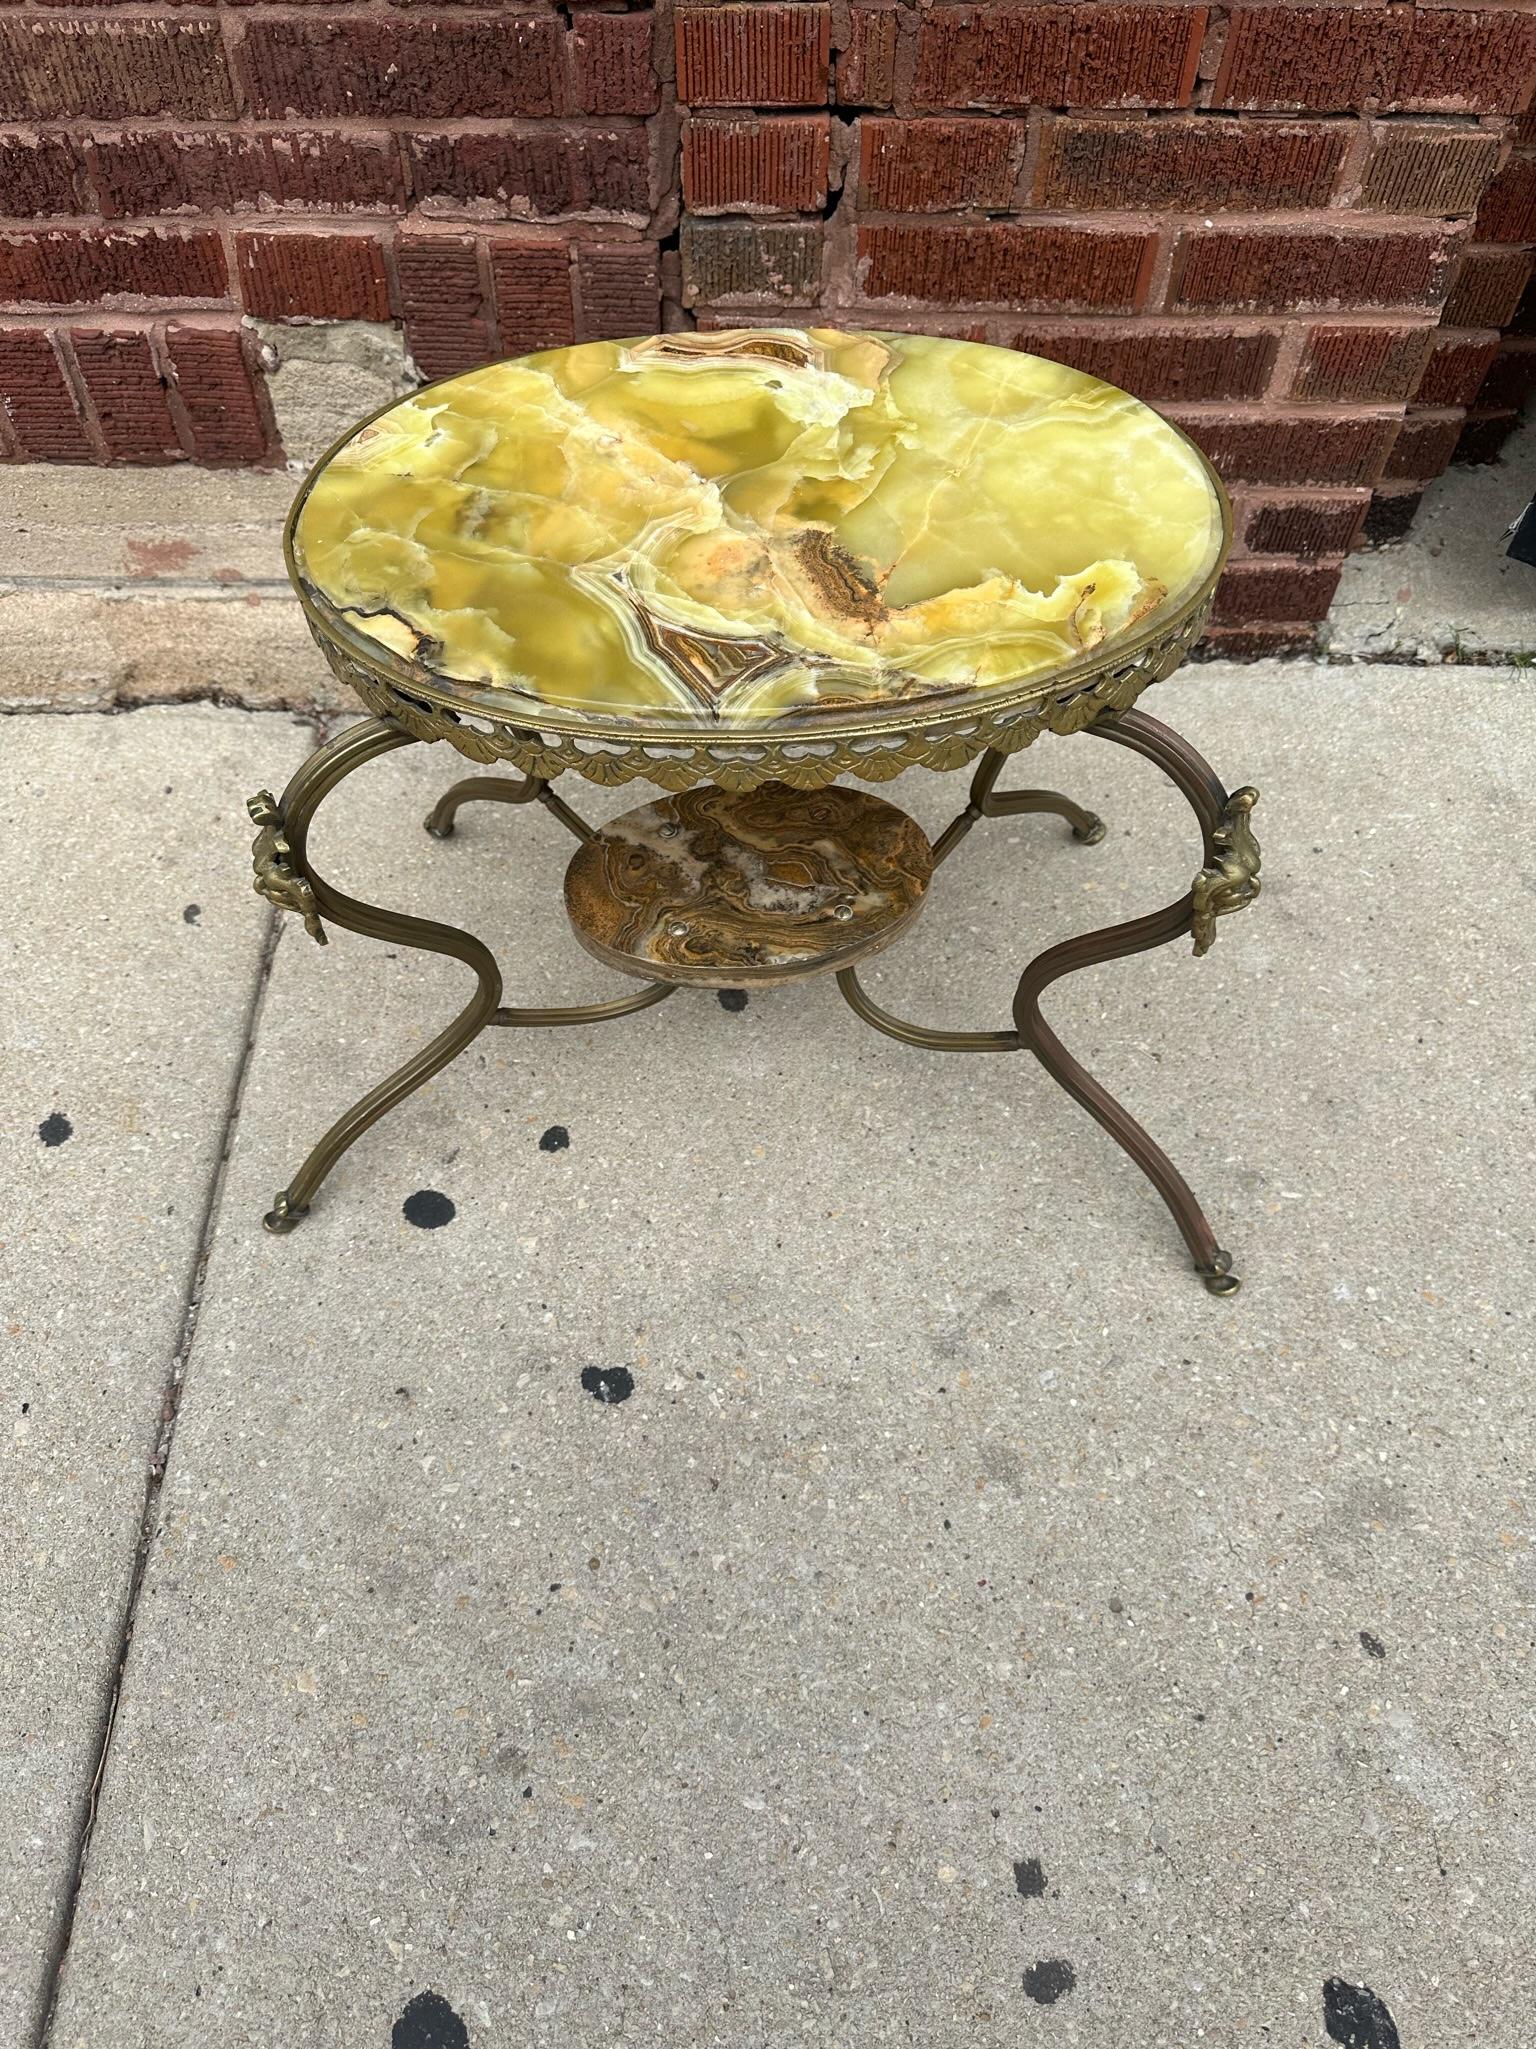 Hand-Crafted Antique Victorian 2 Tier An Ornate Onyx and Brass Figural Devil Heads Side Table